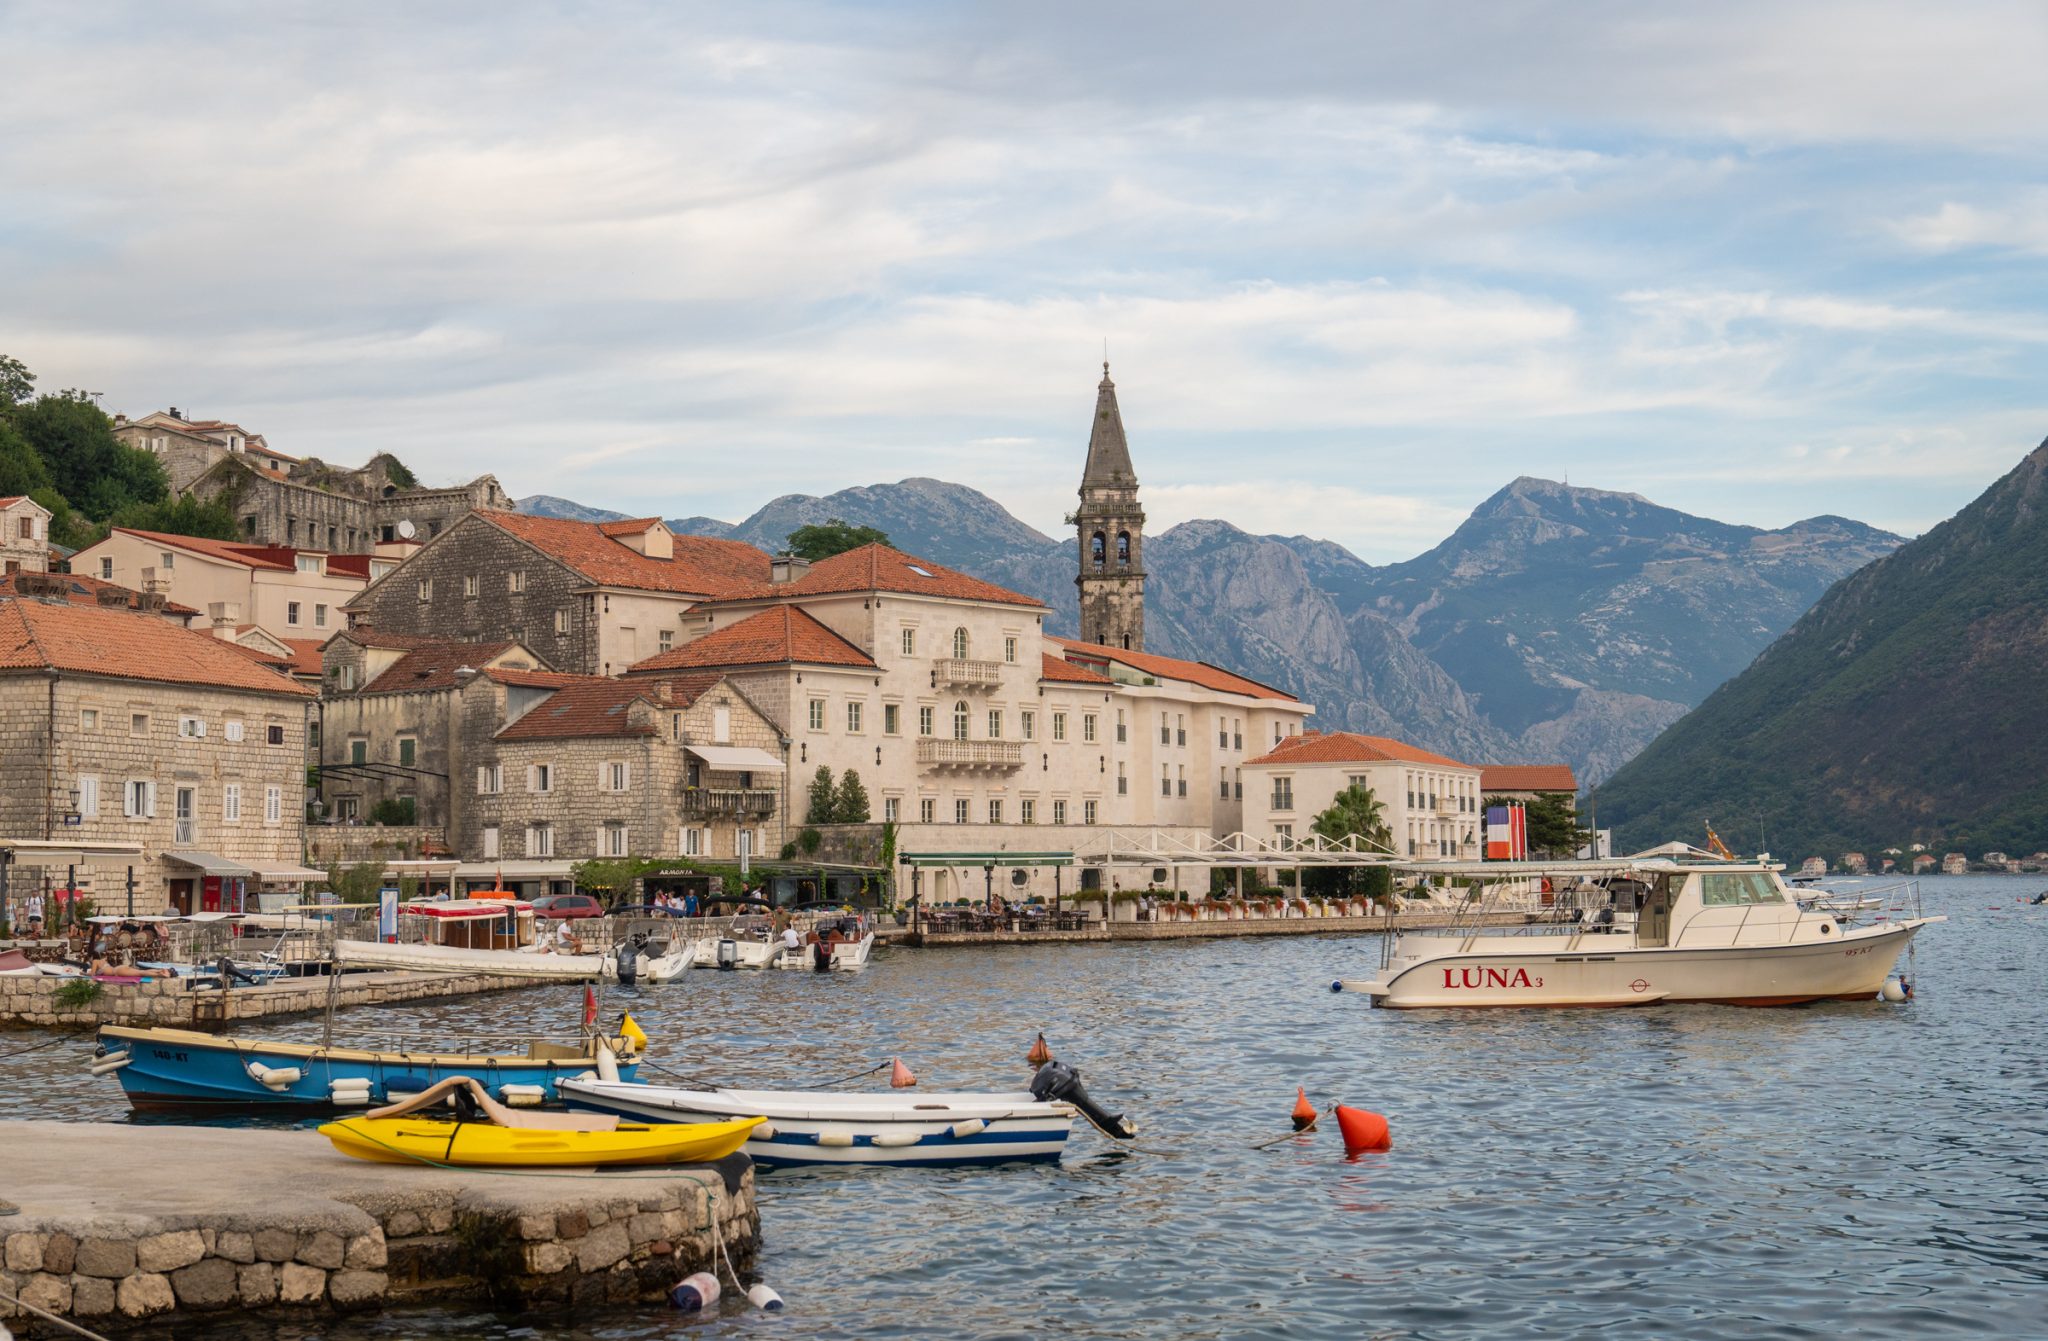 A view of Perast, a small town of small buildings with orange roofs, one bell tower sticking up, set on a peaceful calm bay and surrounded by mountains.